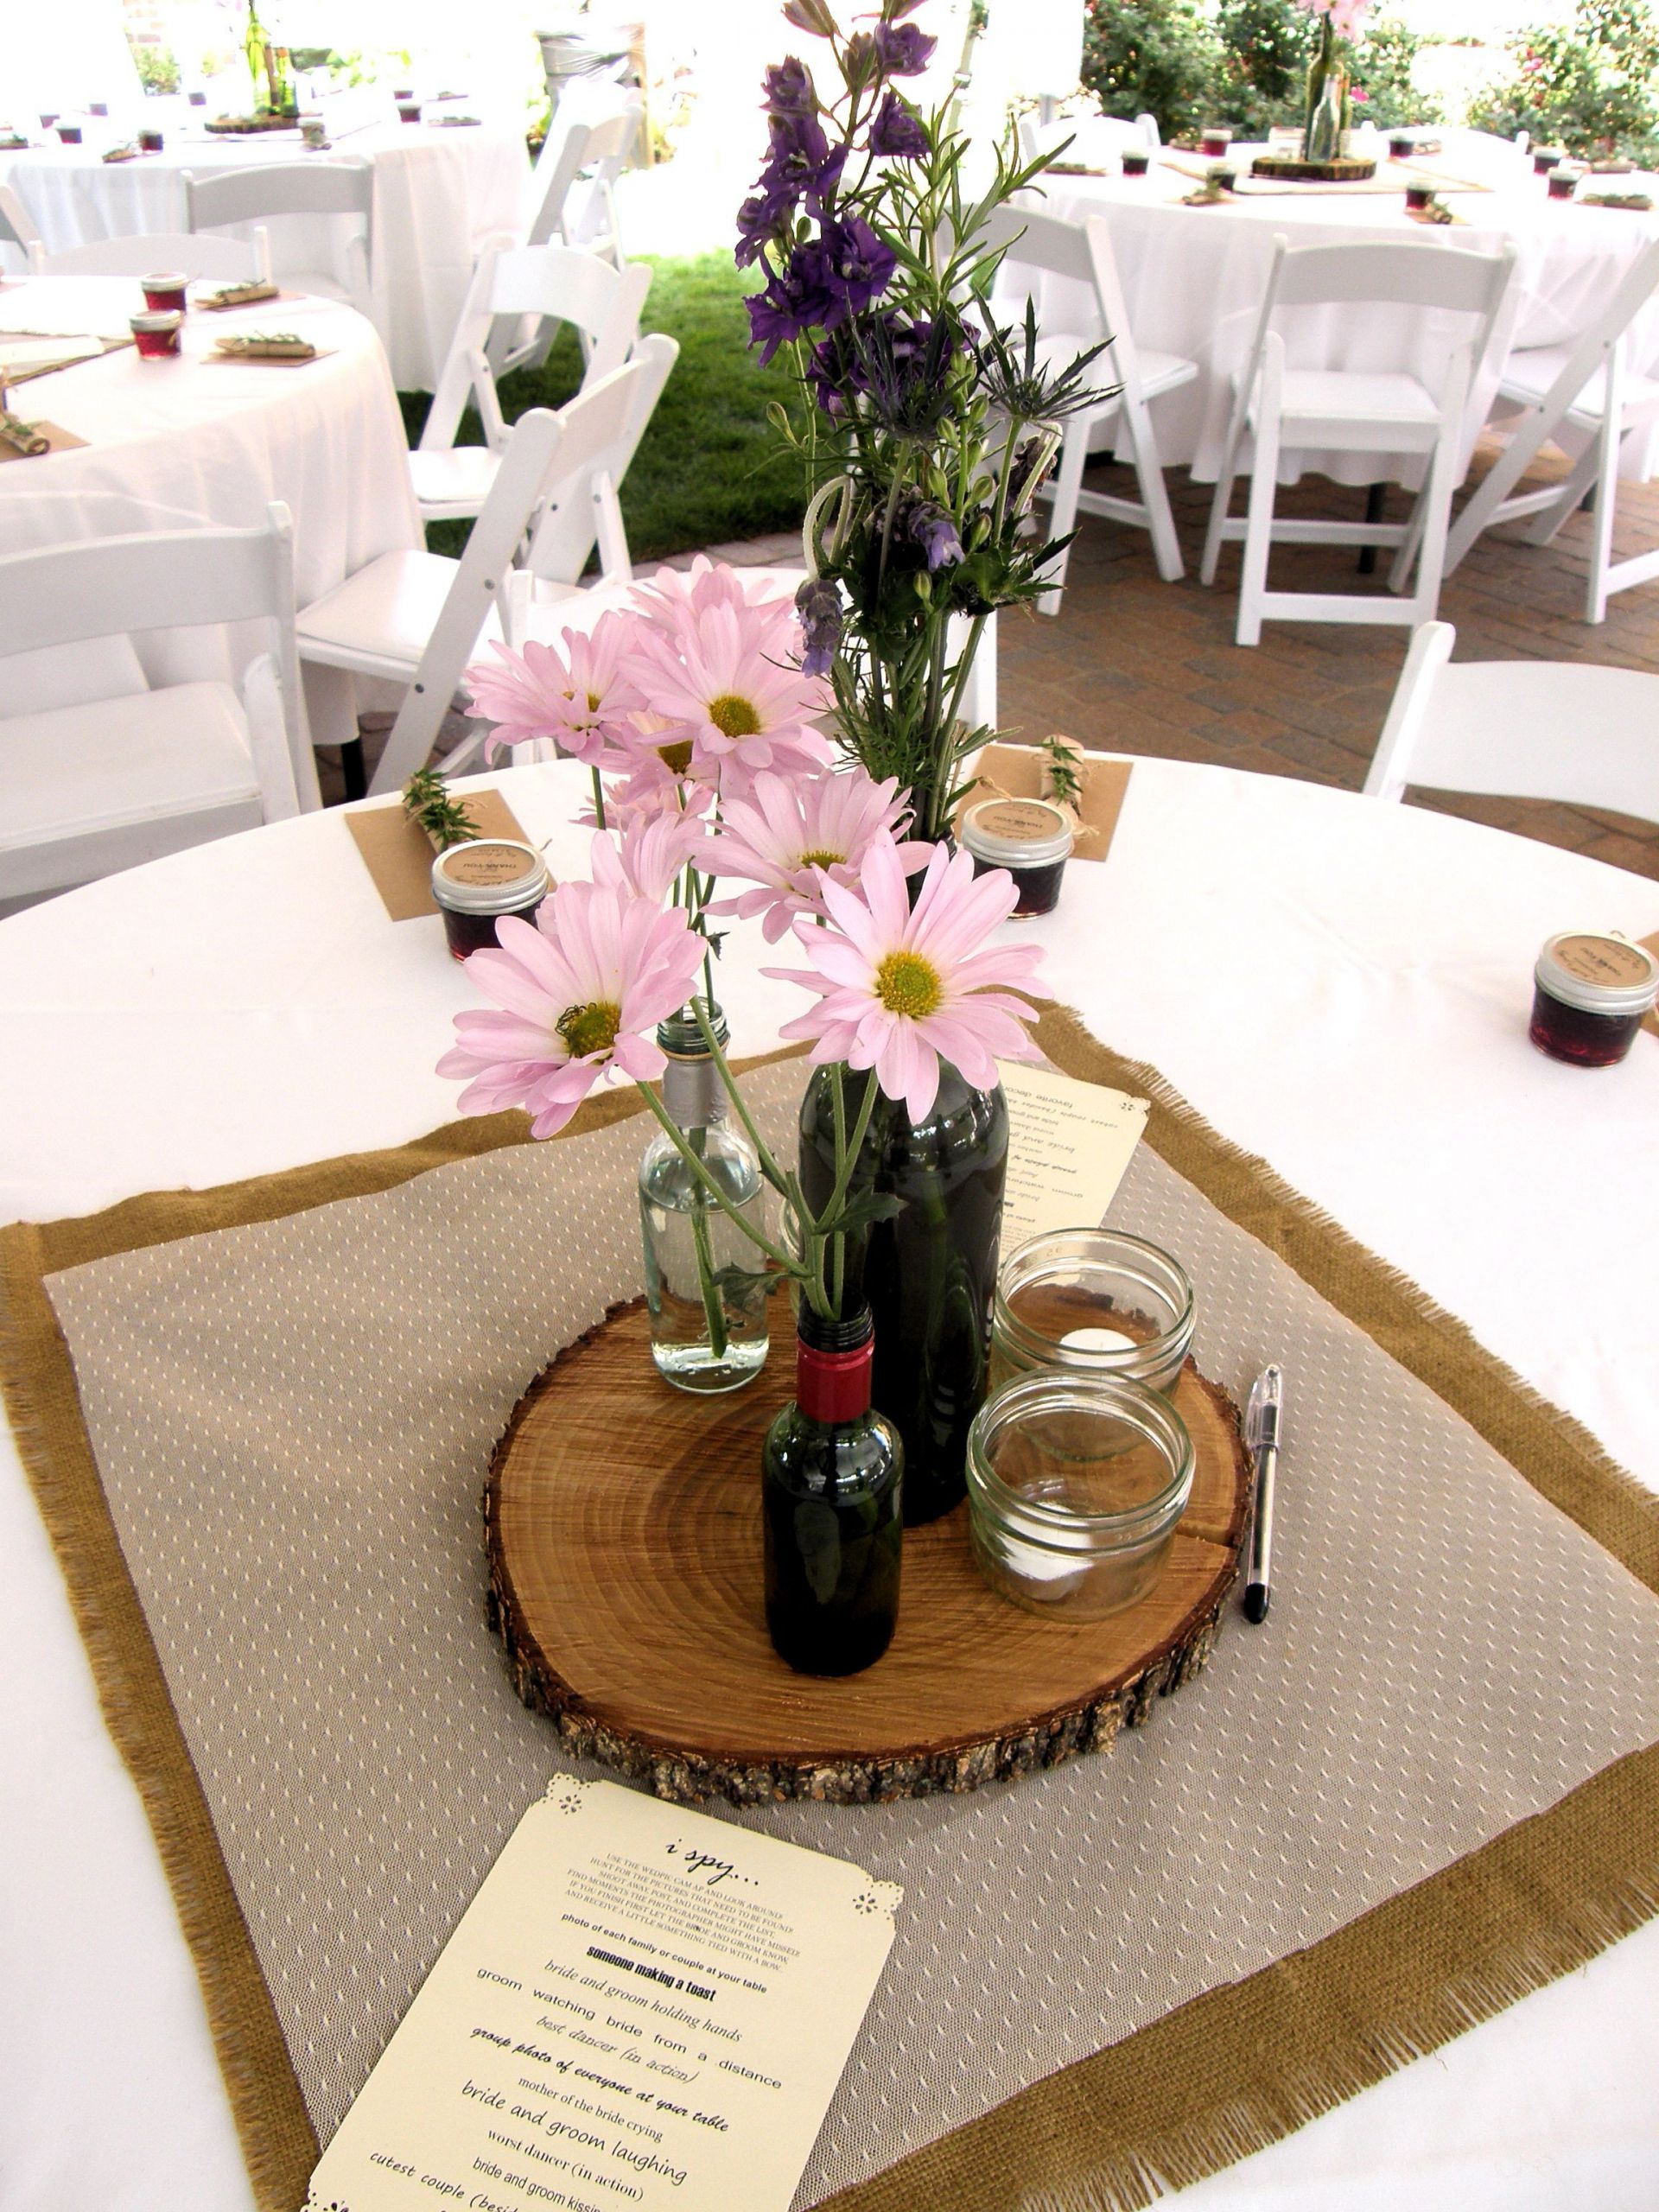 DIY Wood Slab Centerpieces
 Wooden slab centerpieces with old wine bottles labeled